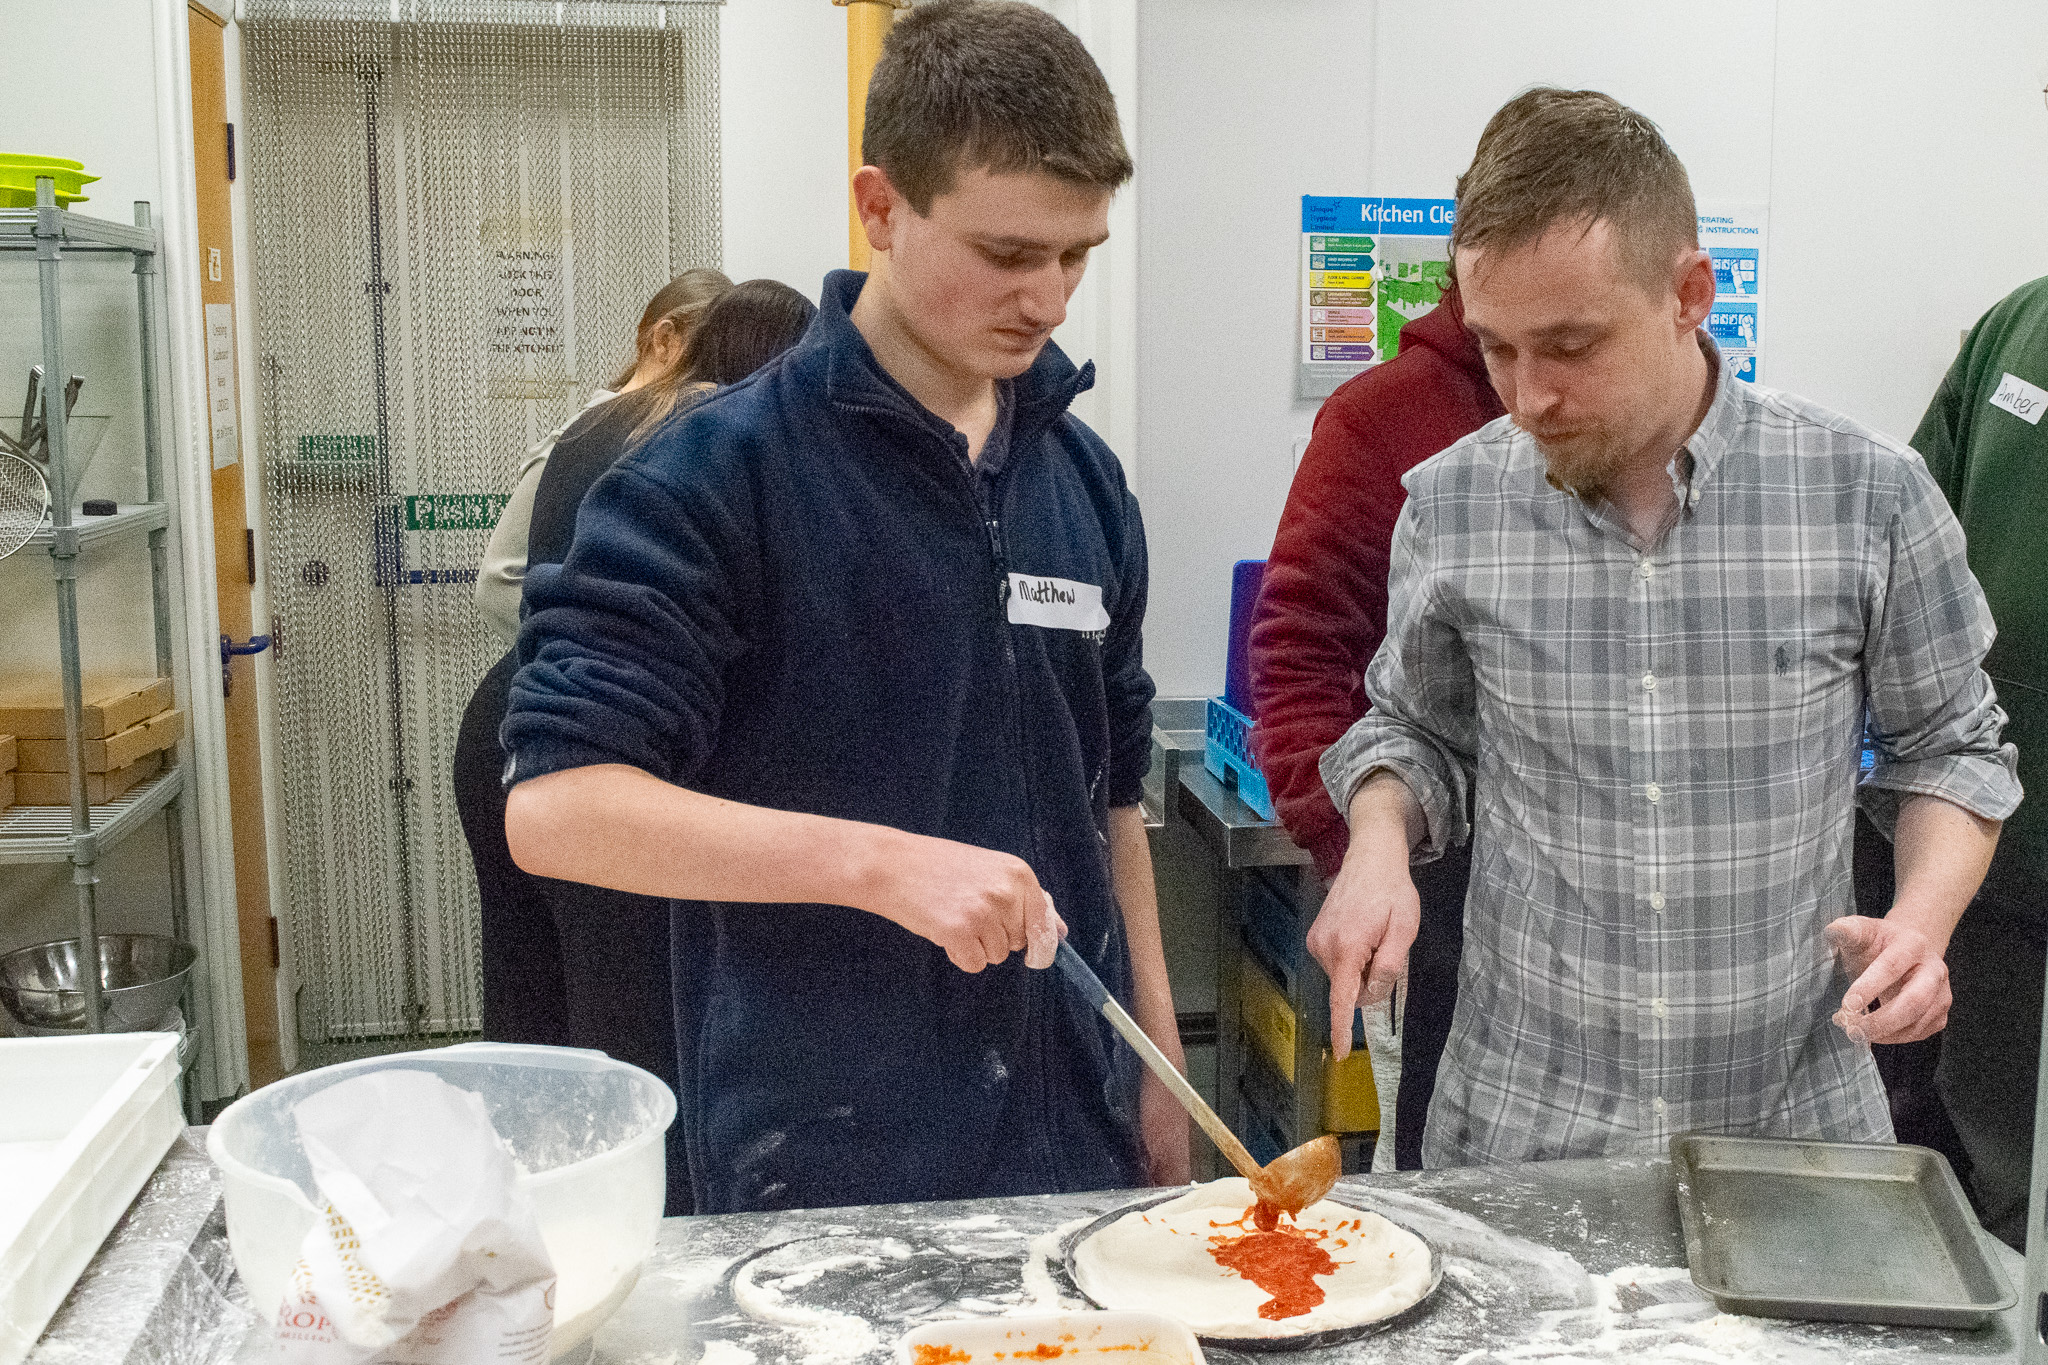 Student holding a ladle of tomato sauce pouring it over his shaped pizza dough on a kitchen work surface. To his right, the teacher is instructing him on technique. 